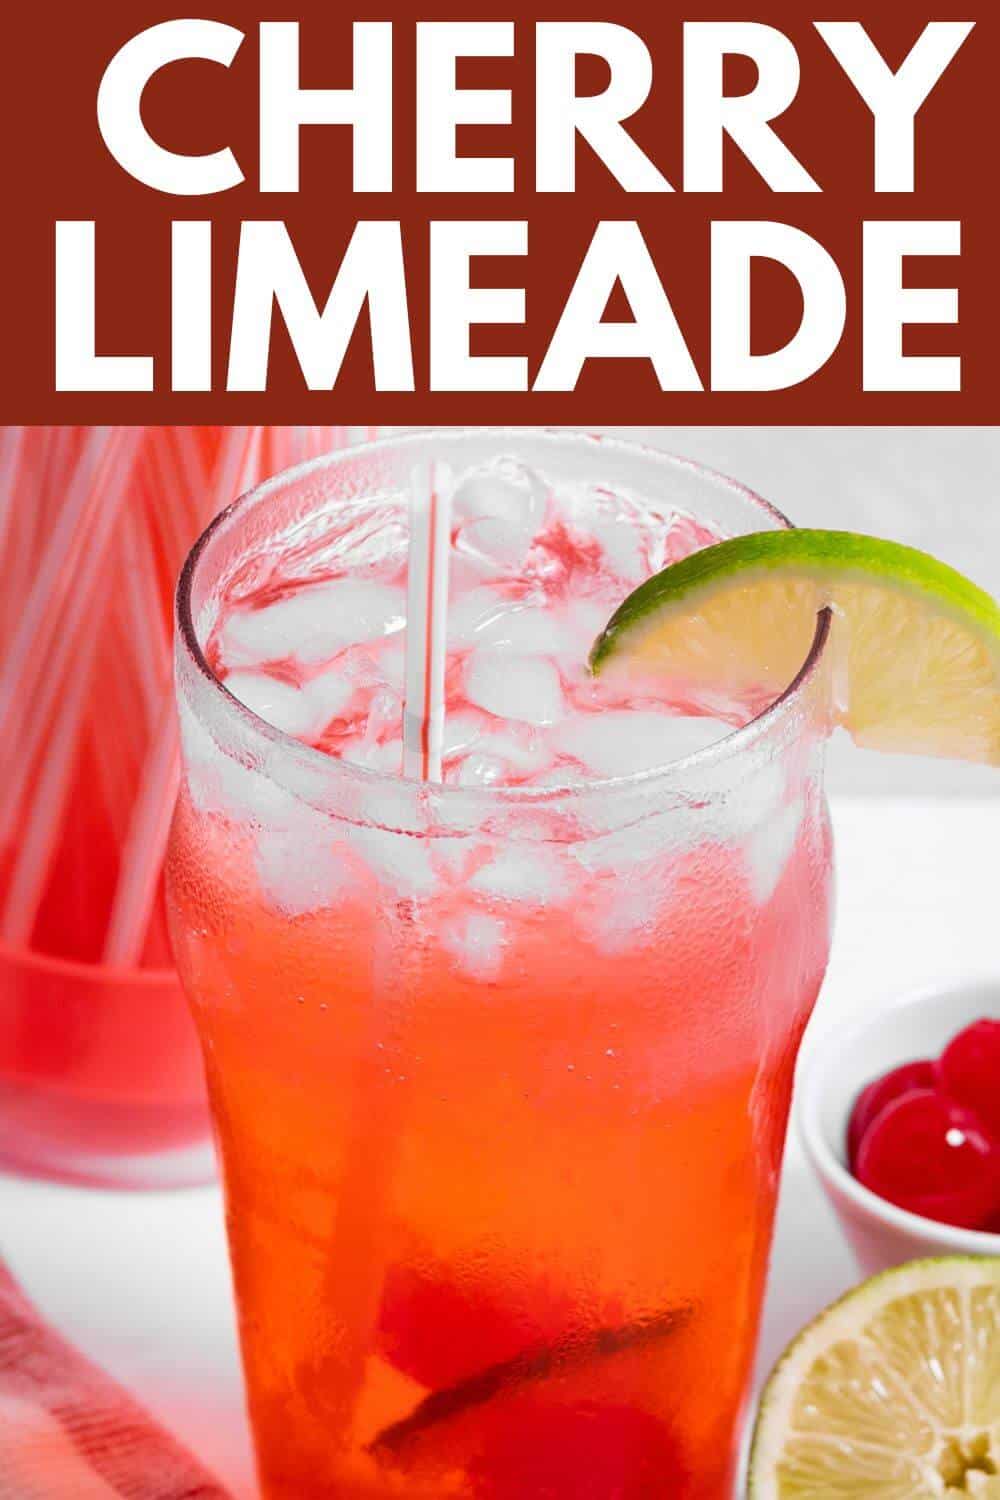 Cherry limeade with title text overlay.